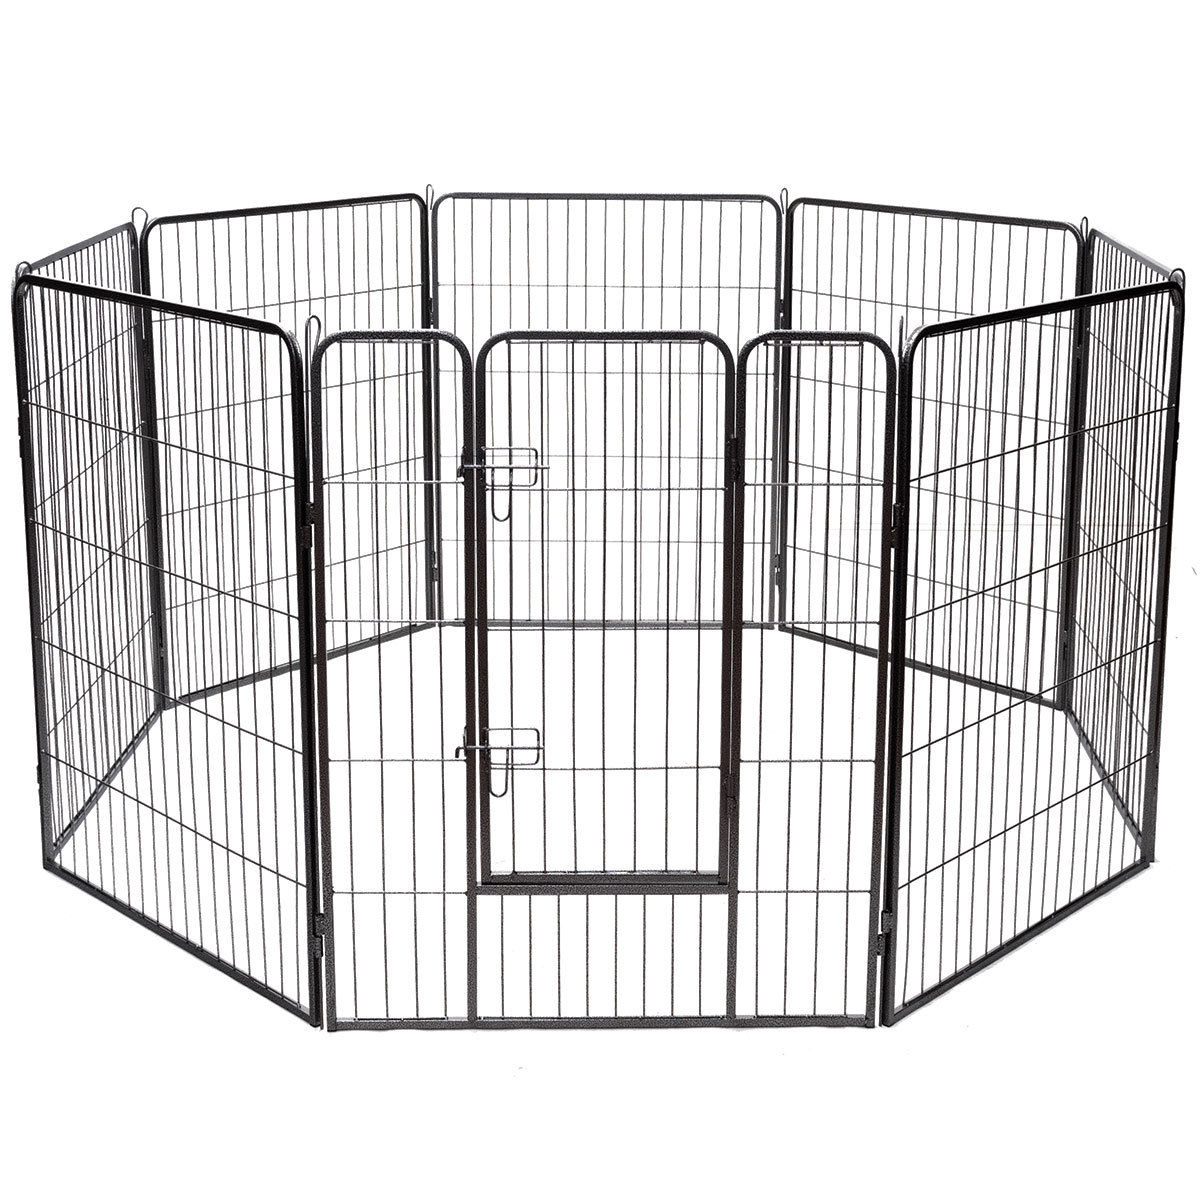 40'' 8 Metal Panel Heavy Duty Pet Playpen Dog Exercise Pen Cat Fence Safety Gate